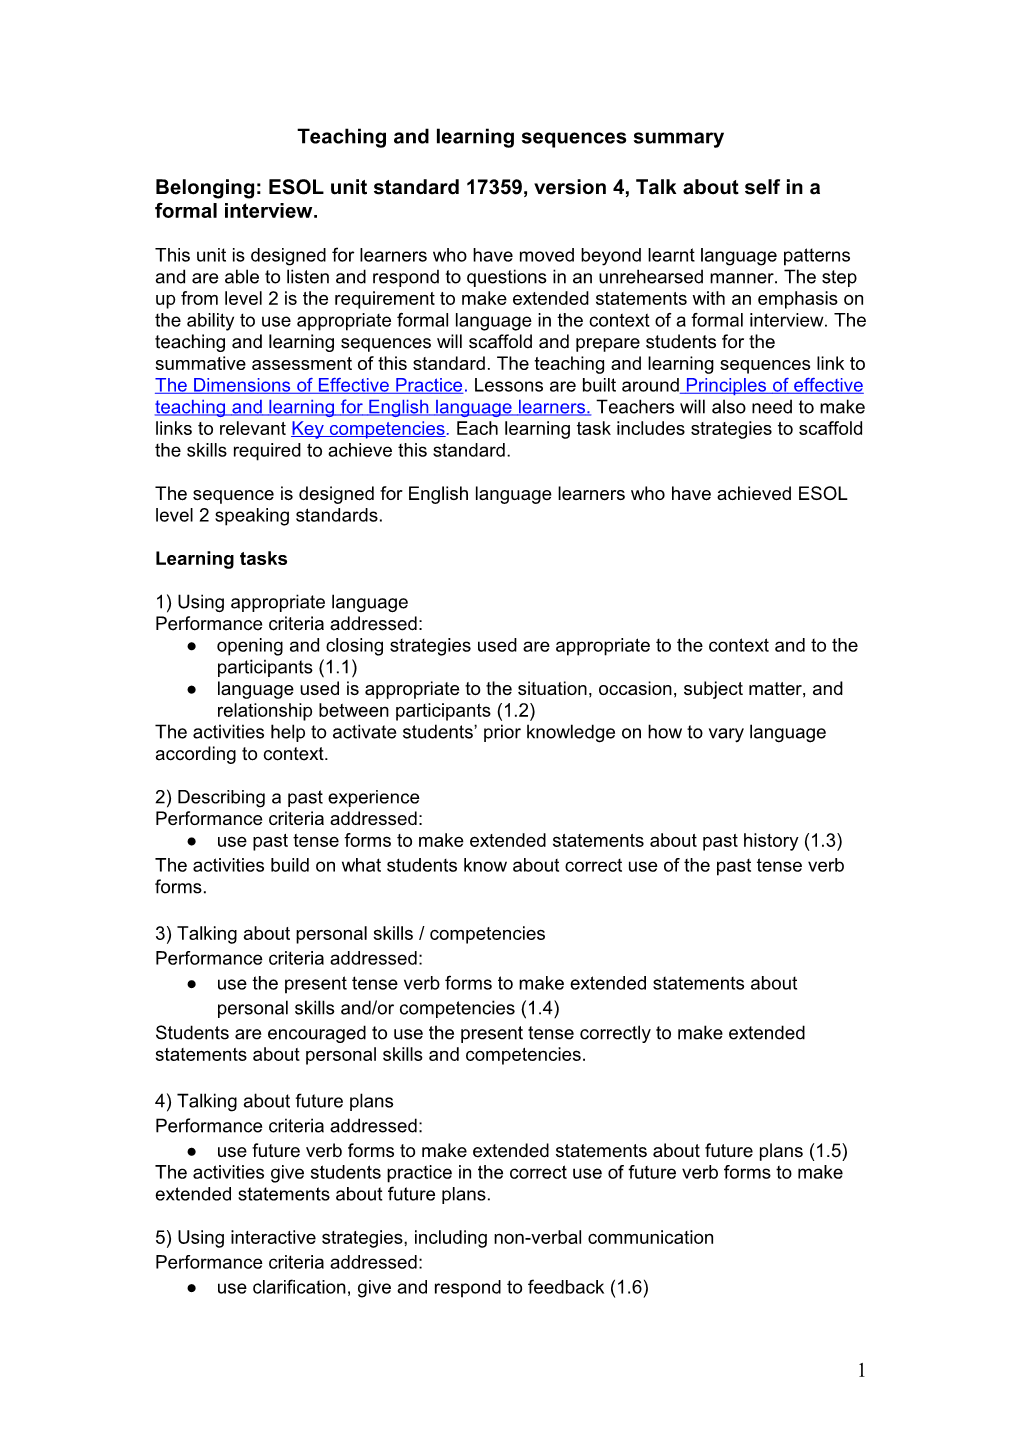 Teaching and Learning Sequences Summary